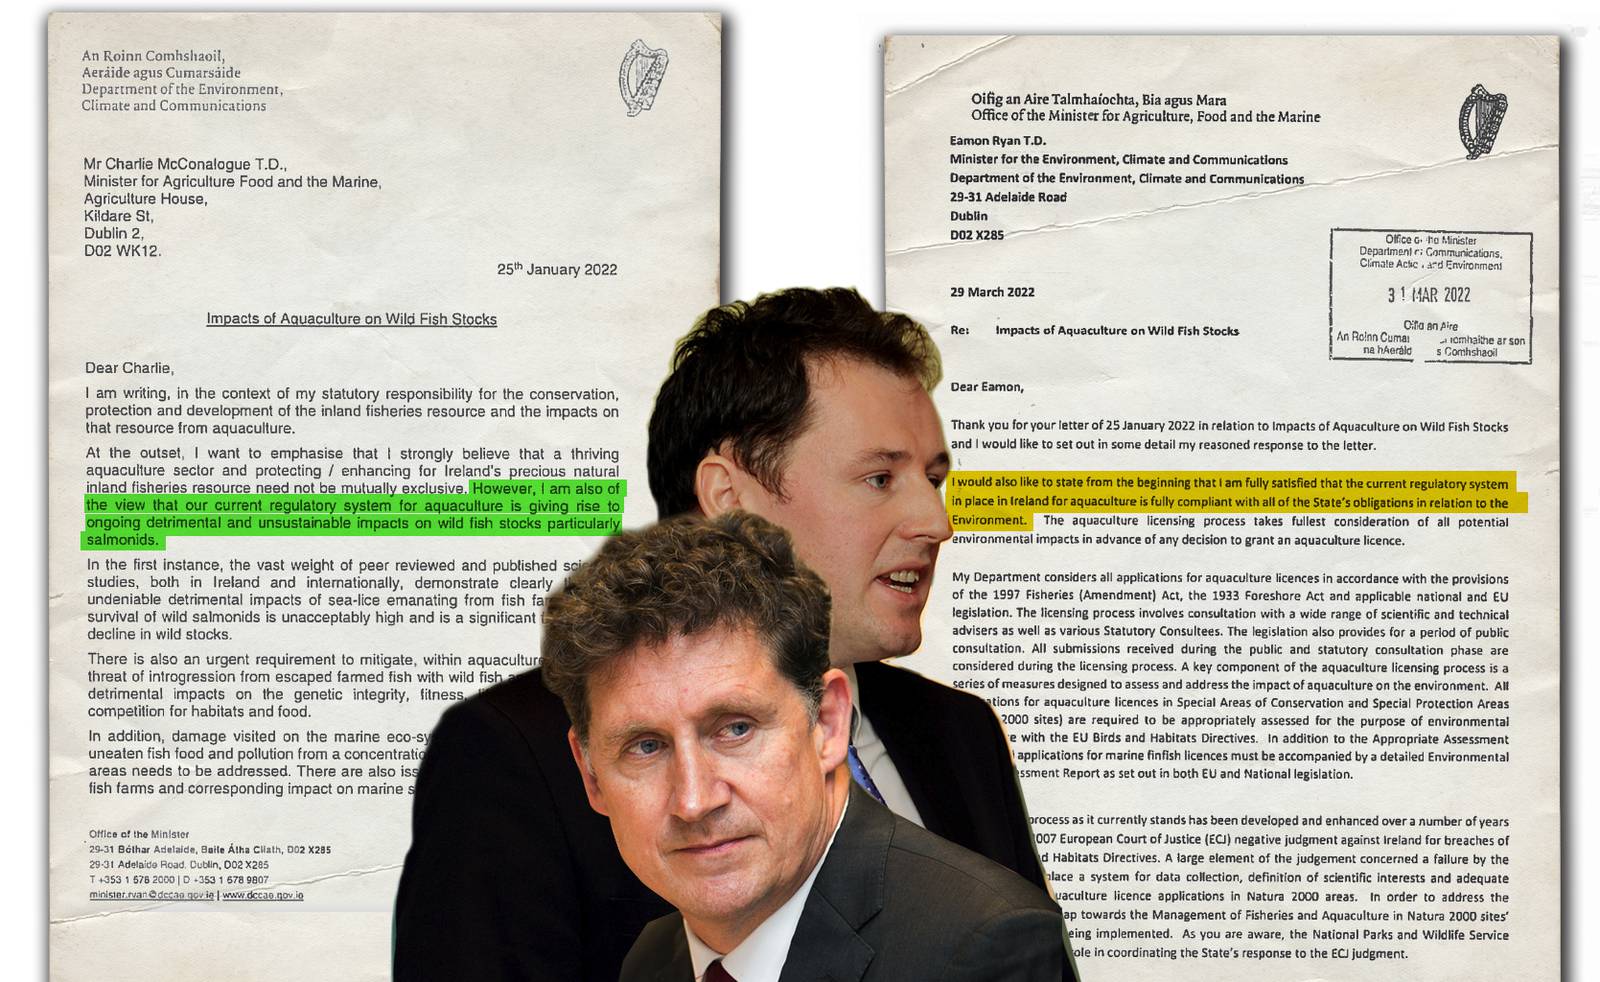 Graphic of letters exchanged between Dept of Environment and DAFM with headshots of Ryan and McConalogue